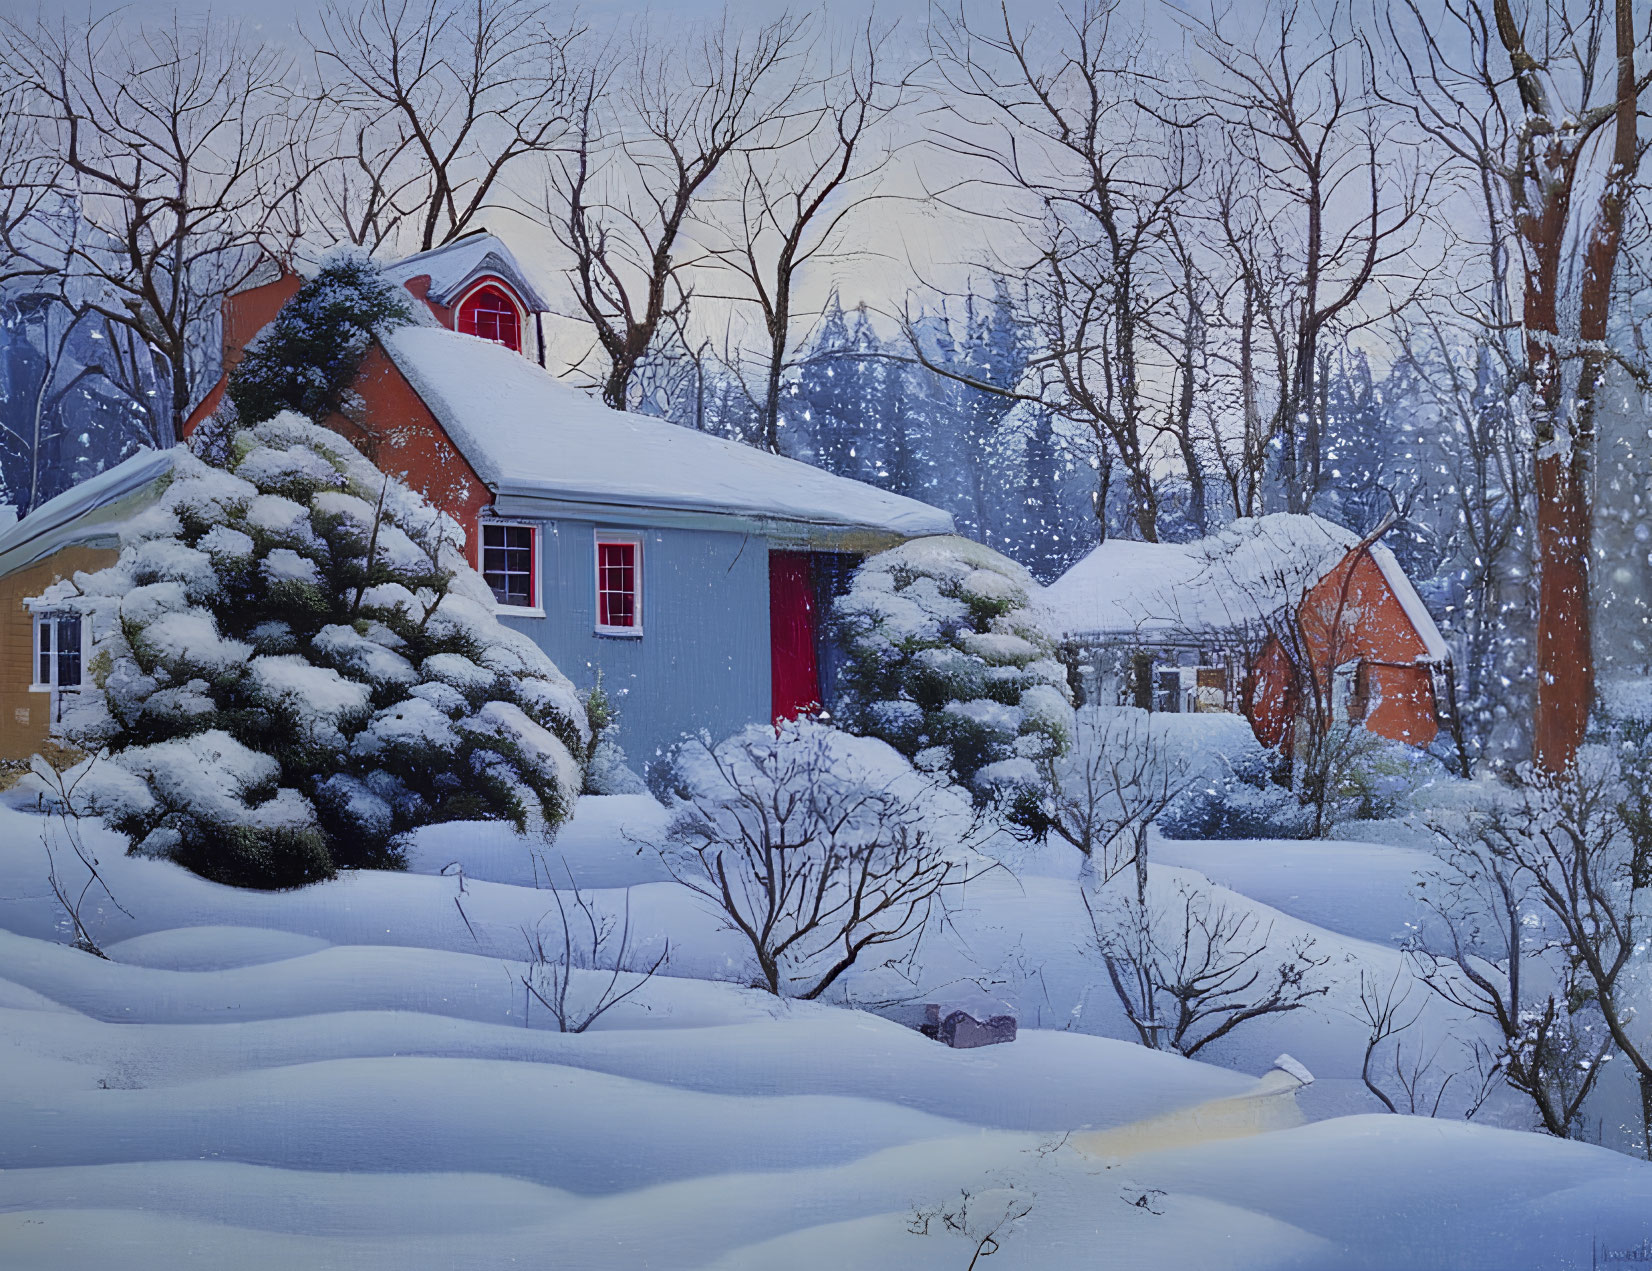 Snow-covered winter landscape with houses and snow-laden trees.